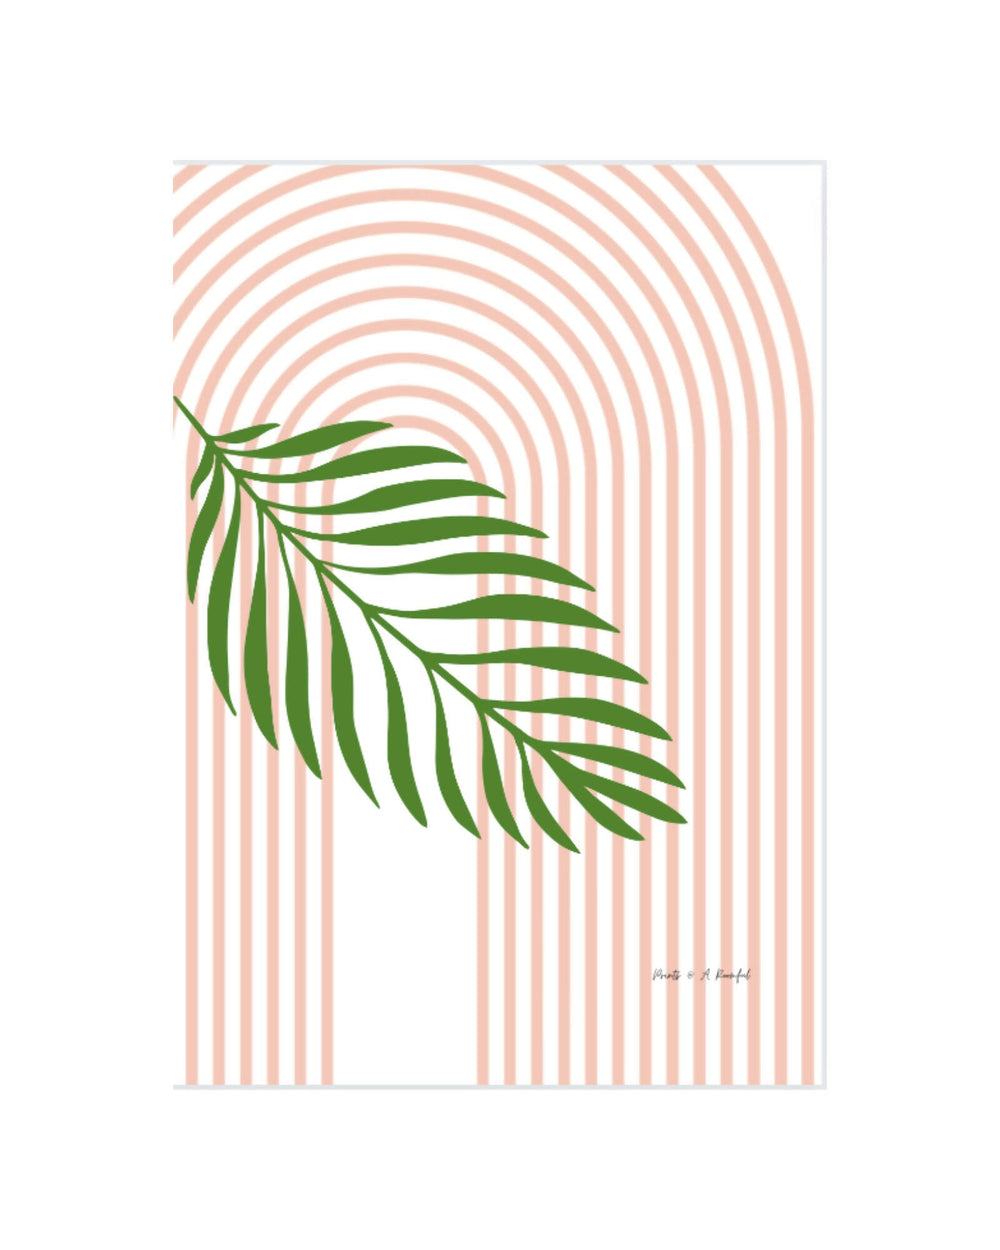 wall art : inspired by foliage Art Prints@ARoomful 